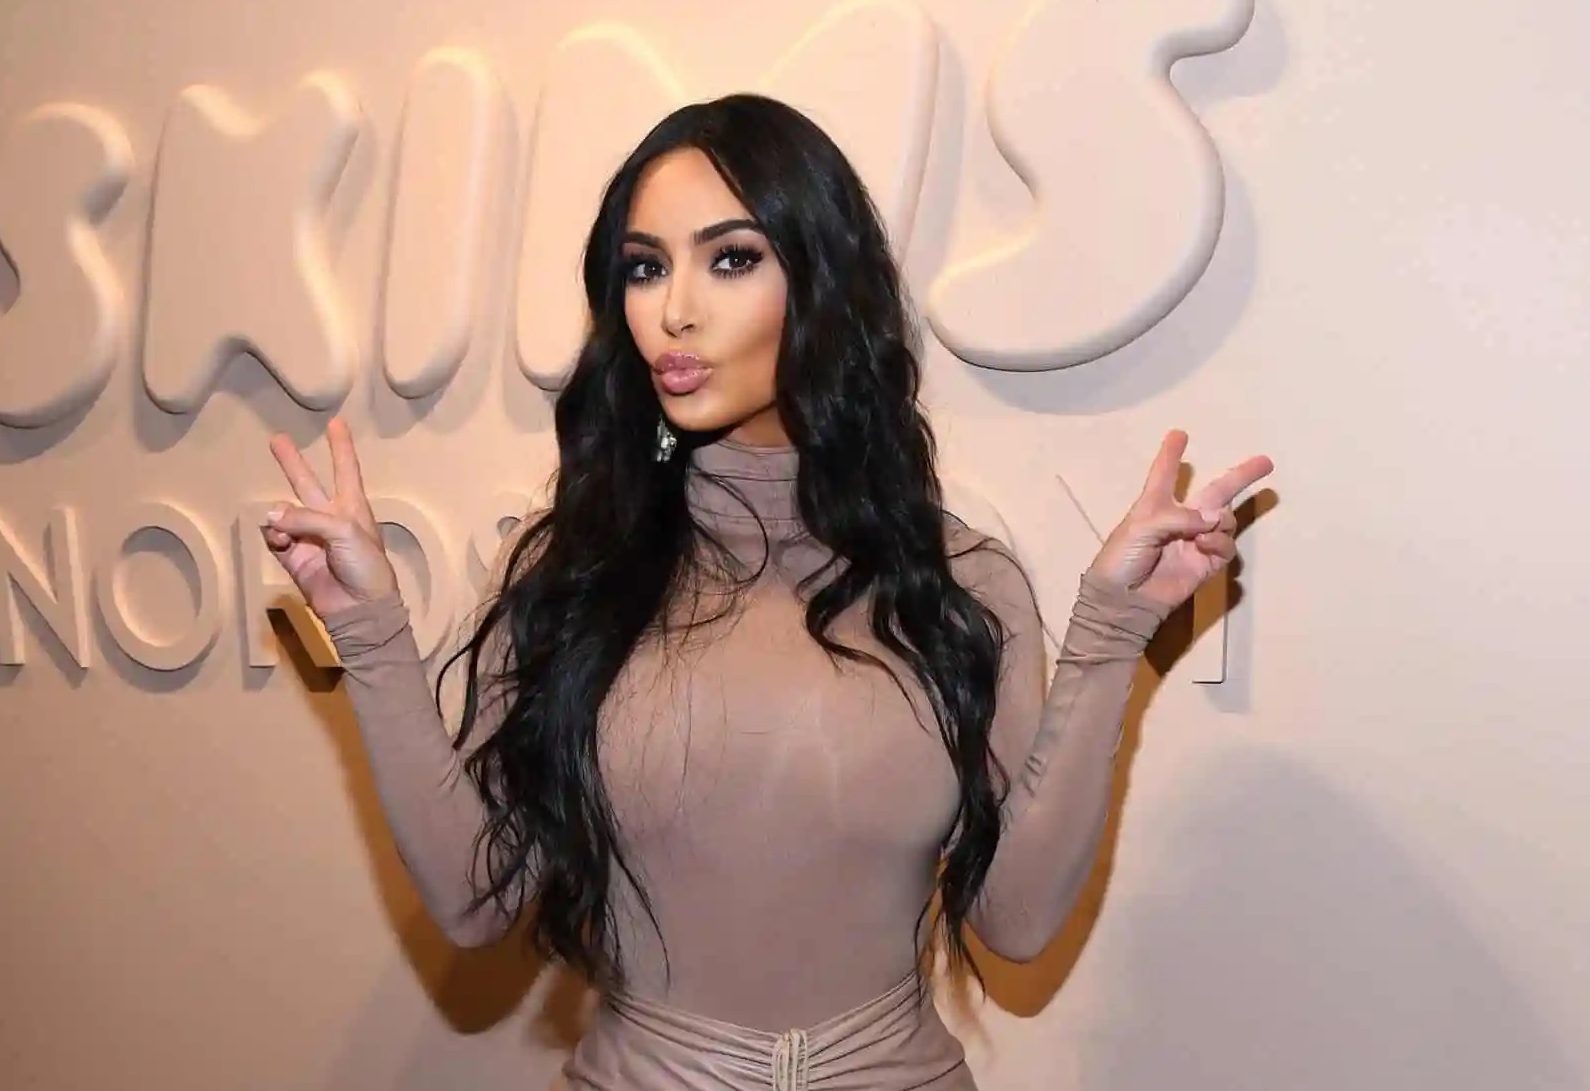 Kim Kardashian's company sued for body tape that allegedly damages, rips  skin